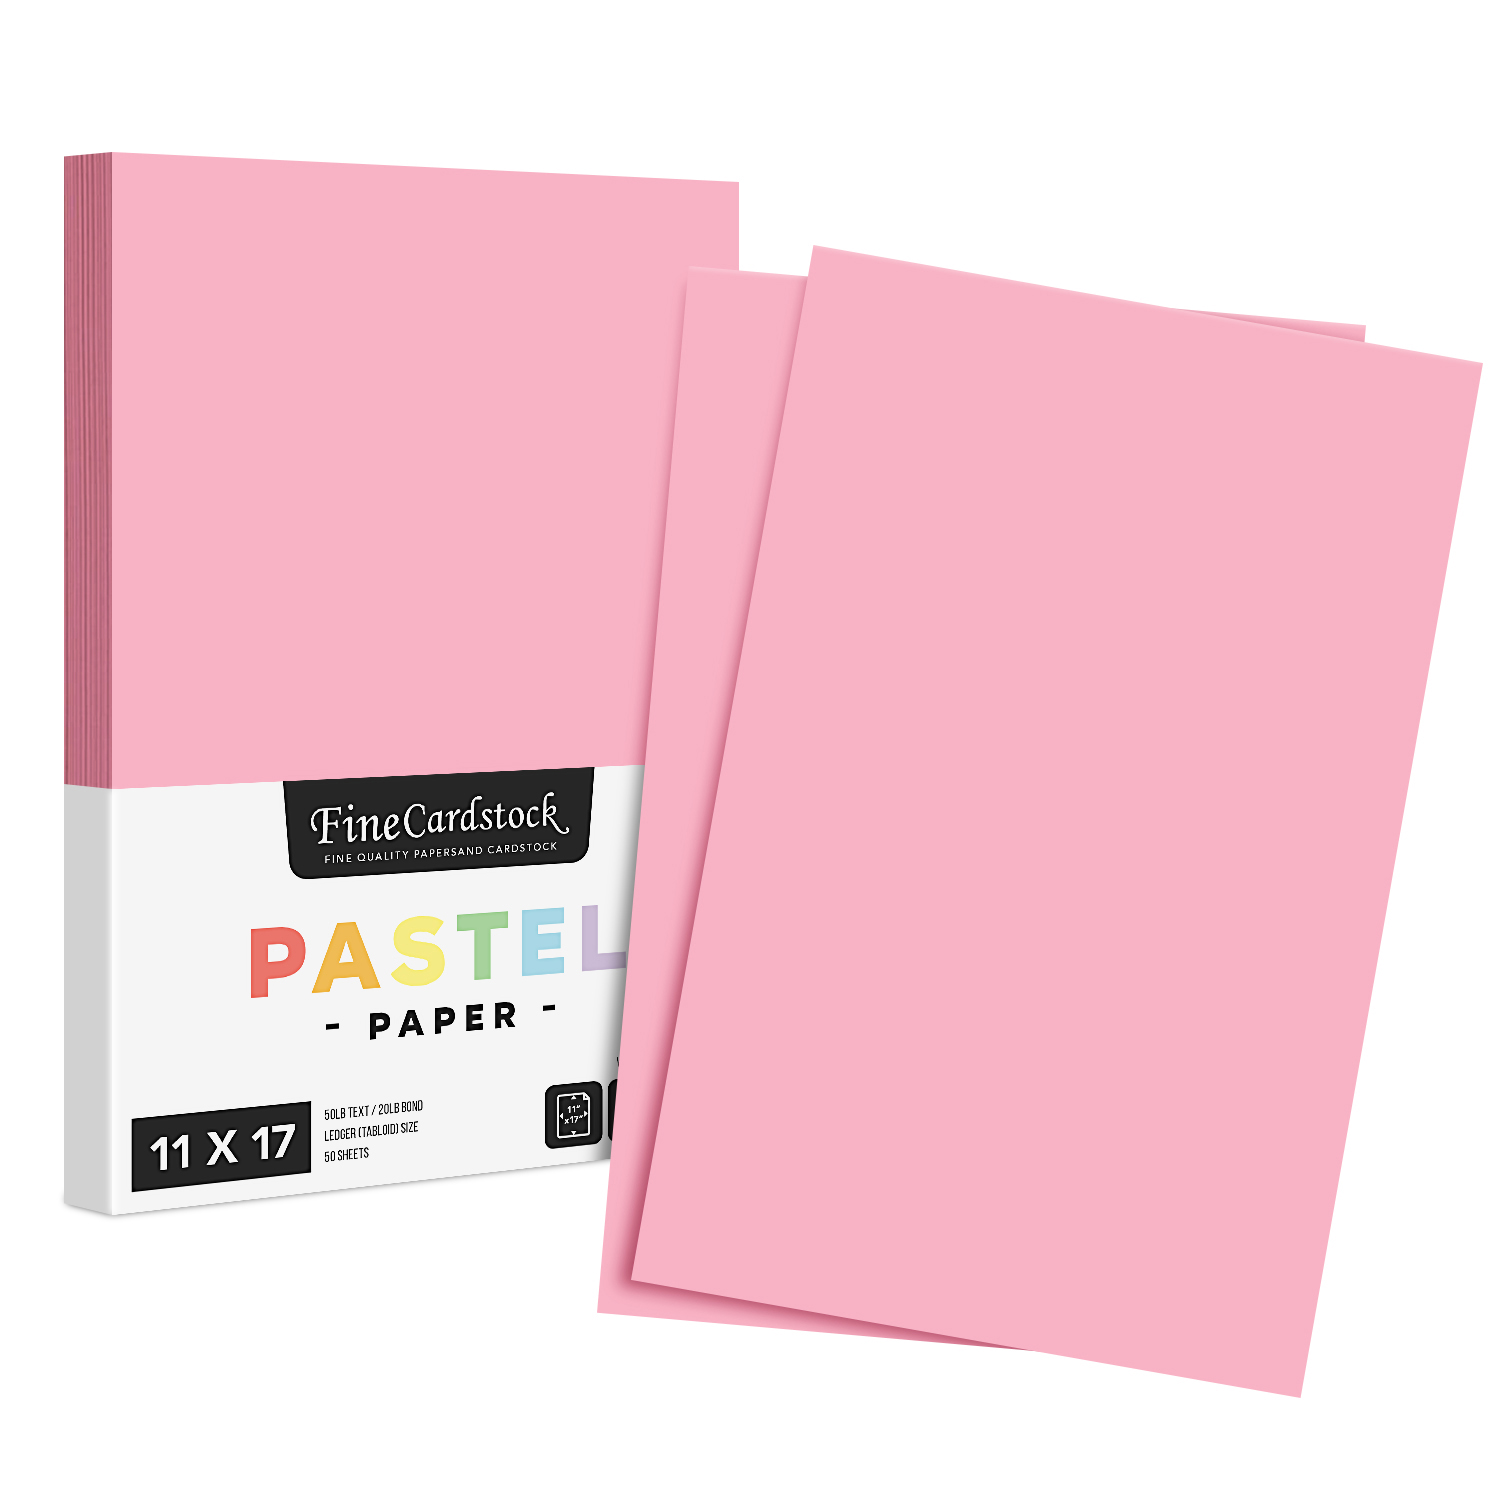 11 x 17 Pastel Paper Pink - Bulk and Wholesale - Fine Cardstock